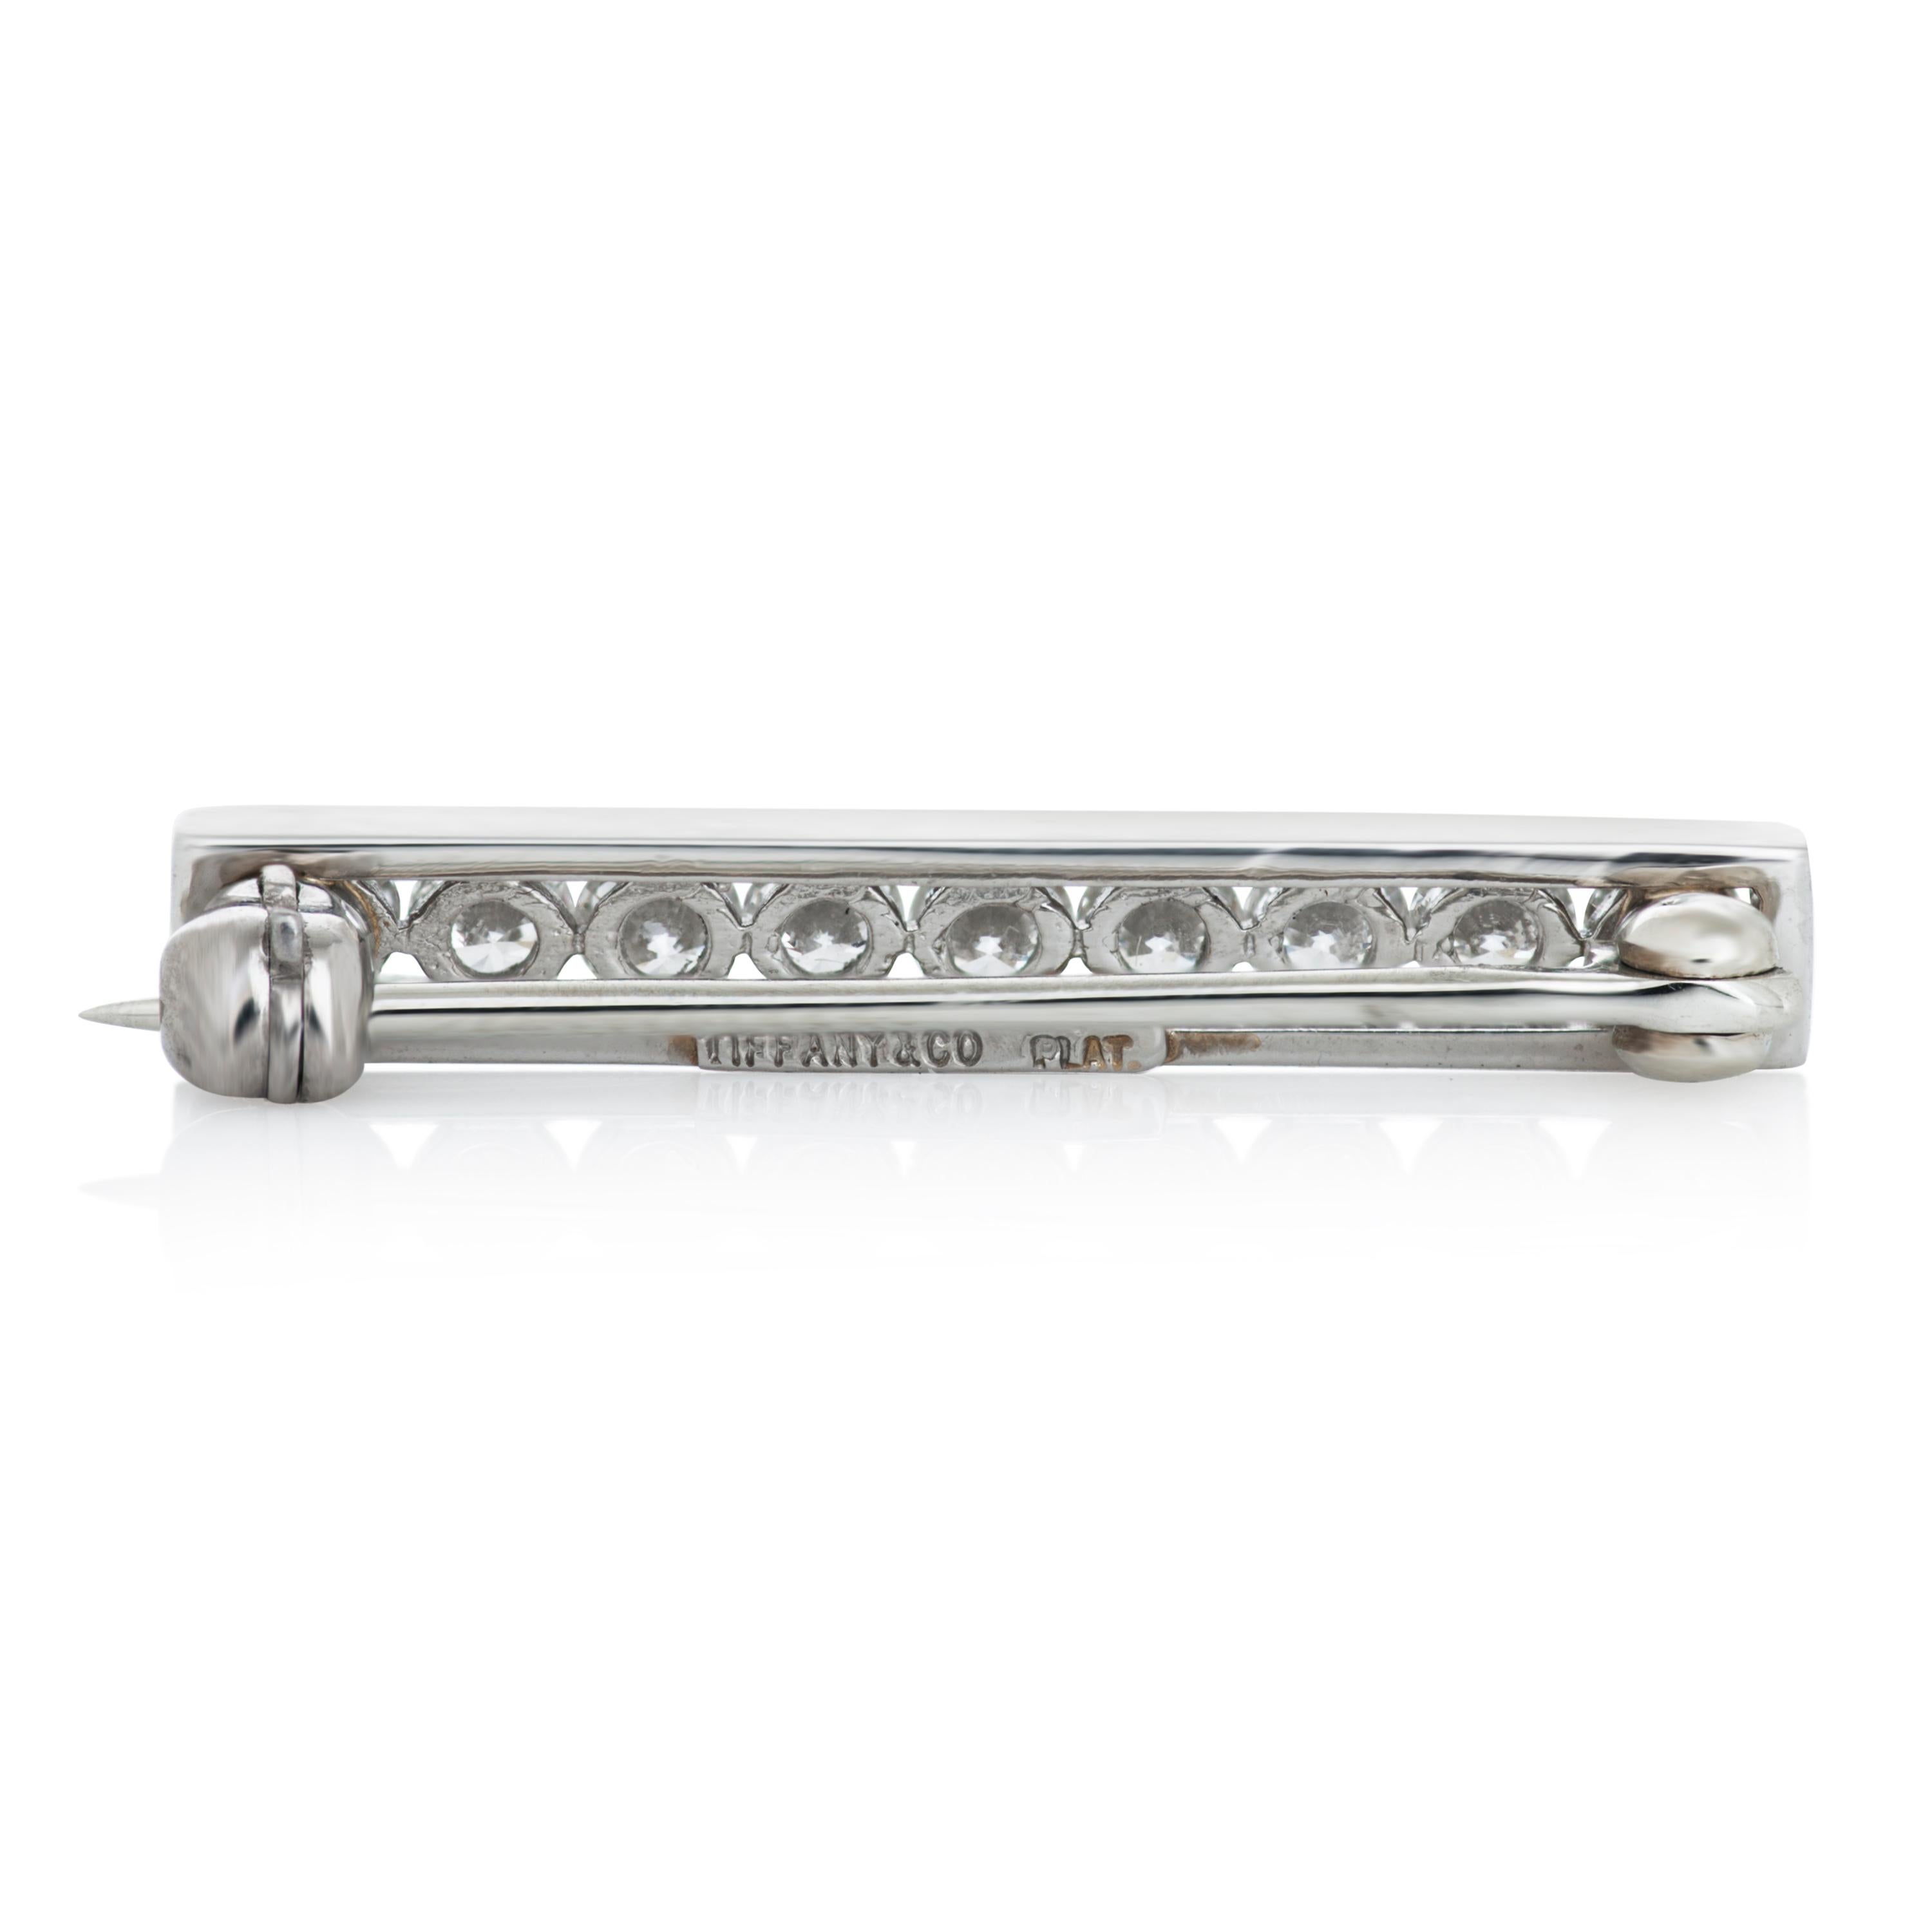 Tiffany & Company round diamond bar brooch in platinum.

This Tiffany brooch features 9 round brilliant cut diamonds totaling approximately 0.50 carat with E color and VS clarity. 

24.55mm long by 3.6mm wide.
2.6 grams.

Stamped 